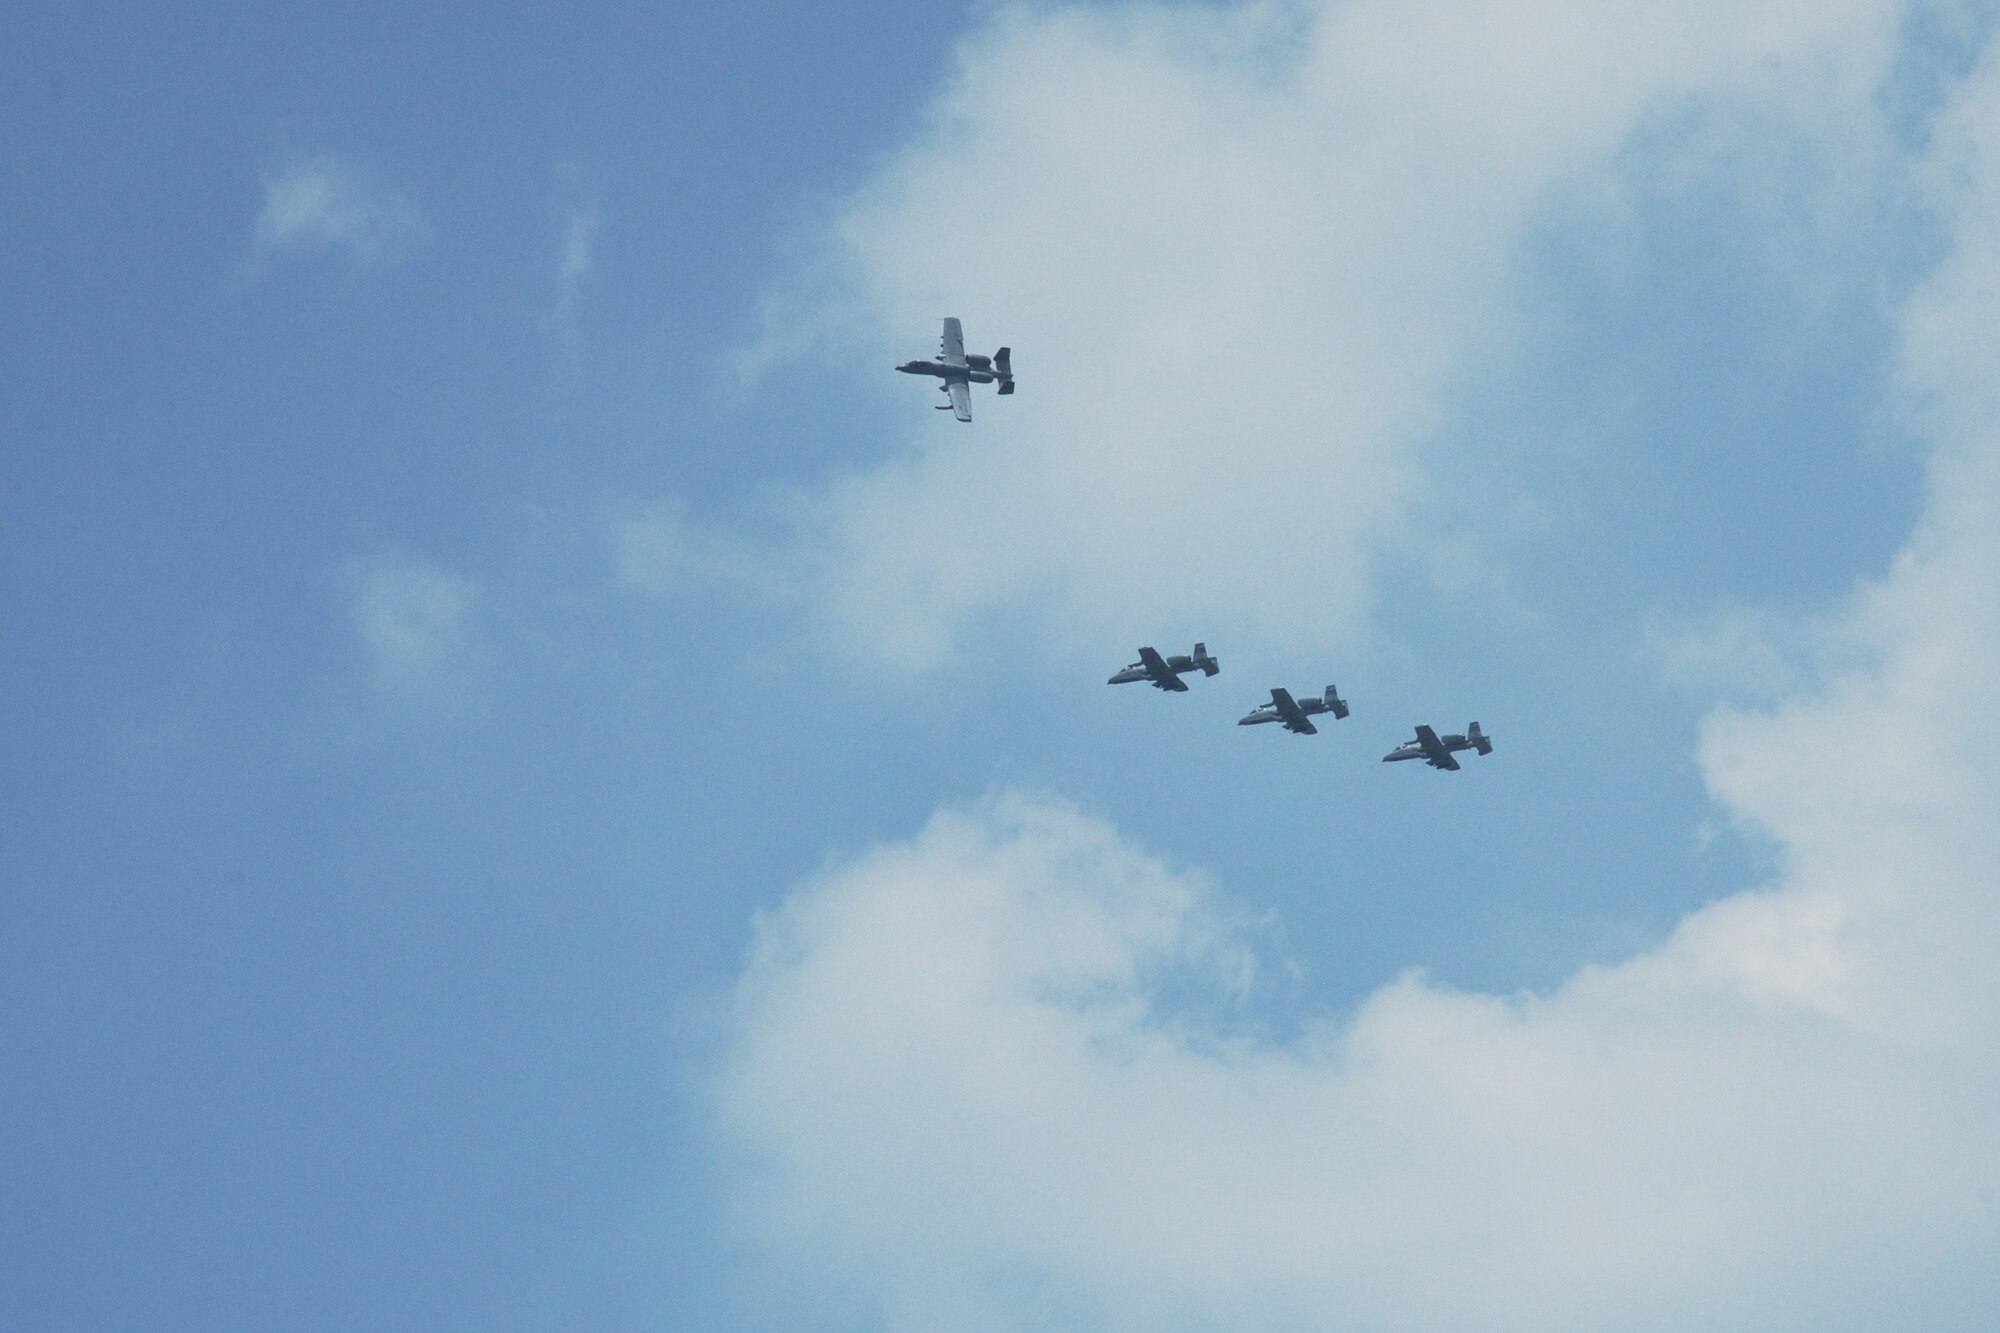 Four U.S. Air Force A-10C Thunderbolt II 
aircraft fly over Clark Air Base, Philippines, upon return from a maritime domain awareness mission April 28, 2016. The aircraft were based out of Clark Air Base, Philippines for the past two weeks as part of U.S. Pacific Command’s first Air Contingent. The air and maritime domain awareness missions promote interoperability and provide greater and more transparent air and maritime situational awareness ensuring safety for military and civilian activities in international waters and airspace. The Air Contingent was stood up at the invitation of the Philippine government and afforded both countries an opportunity to strengthen ties. (U.S. Air Force photo by Capt. Susan Harrington)
